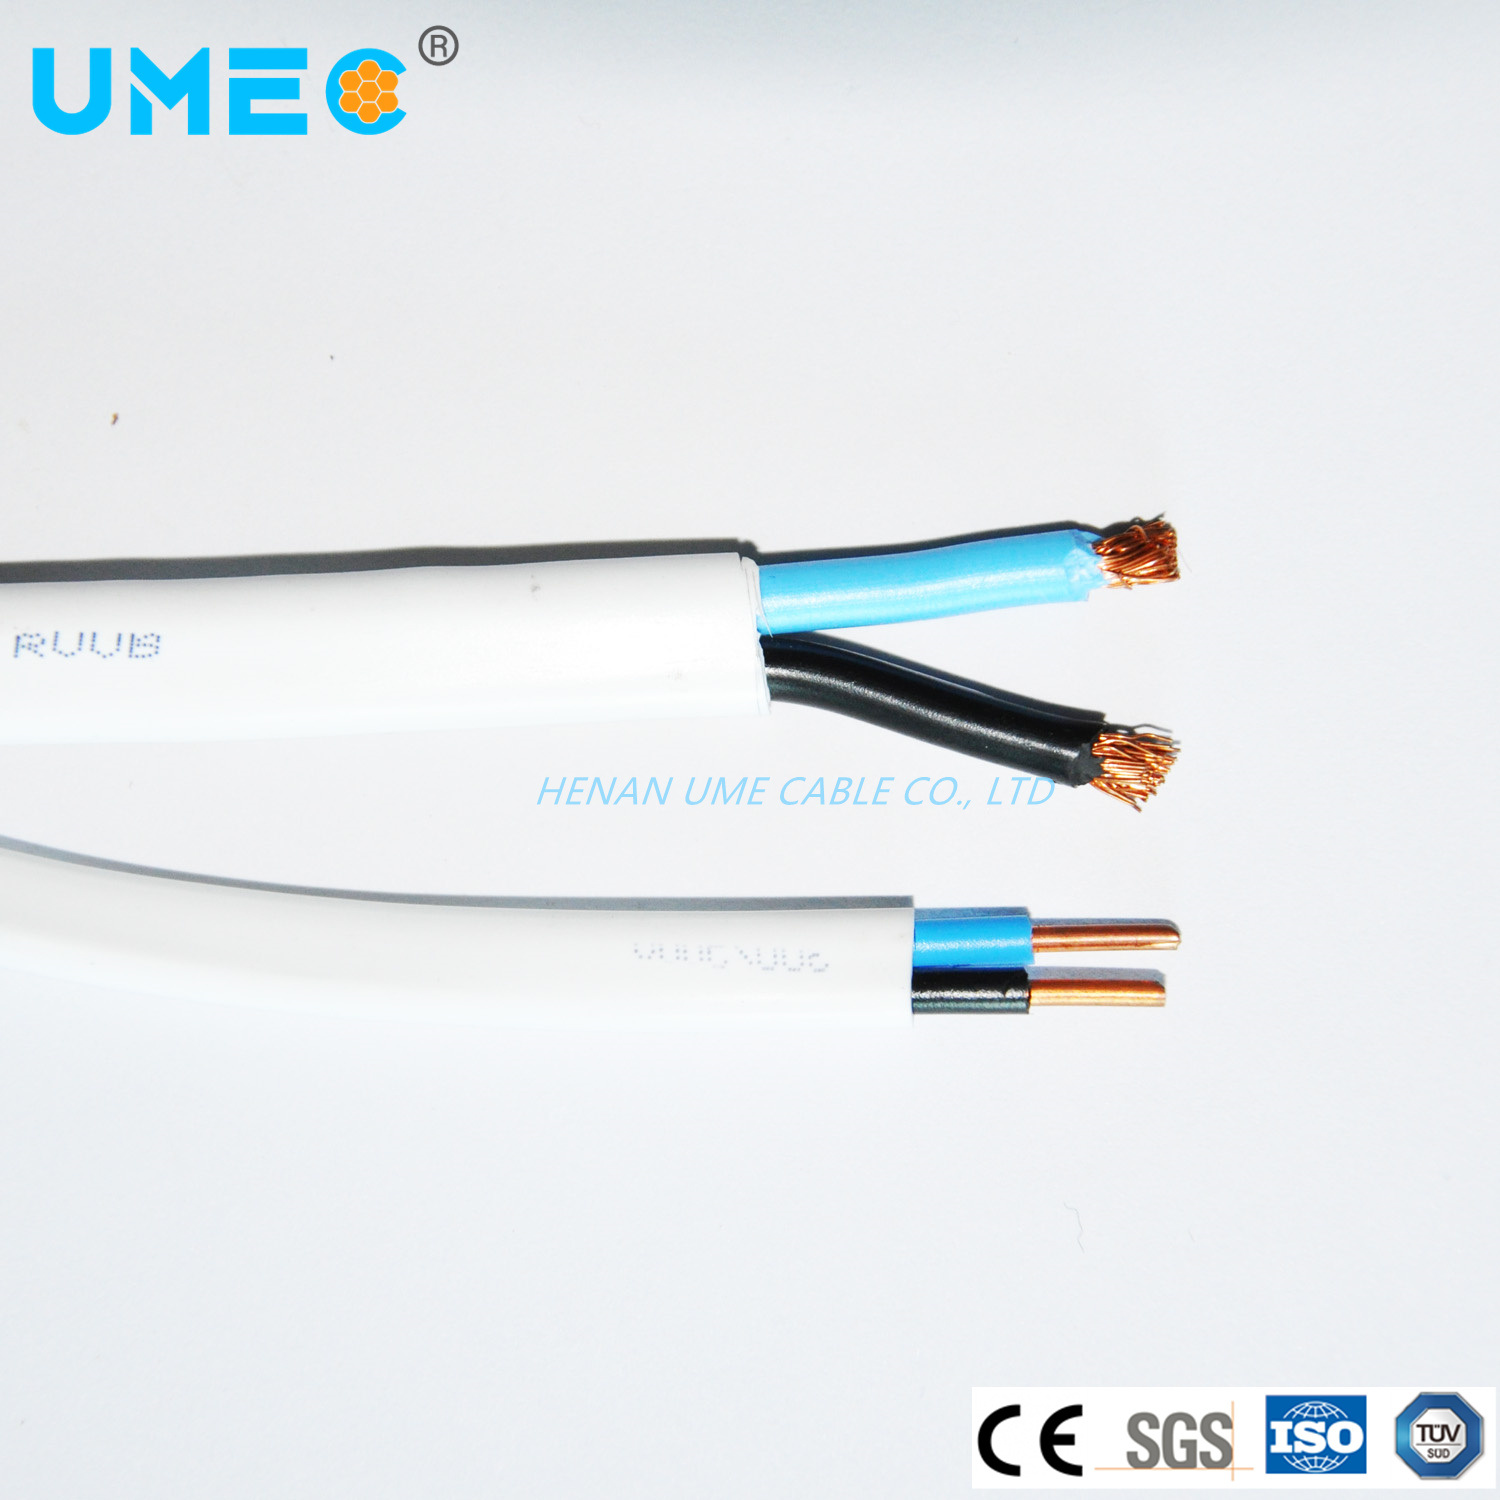 Connections Cable 300/300V 2cores 2X2.5/4/6mm2 Rvvb H03vvh2-F Flat PVC Flexible Copper Electrical Cable